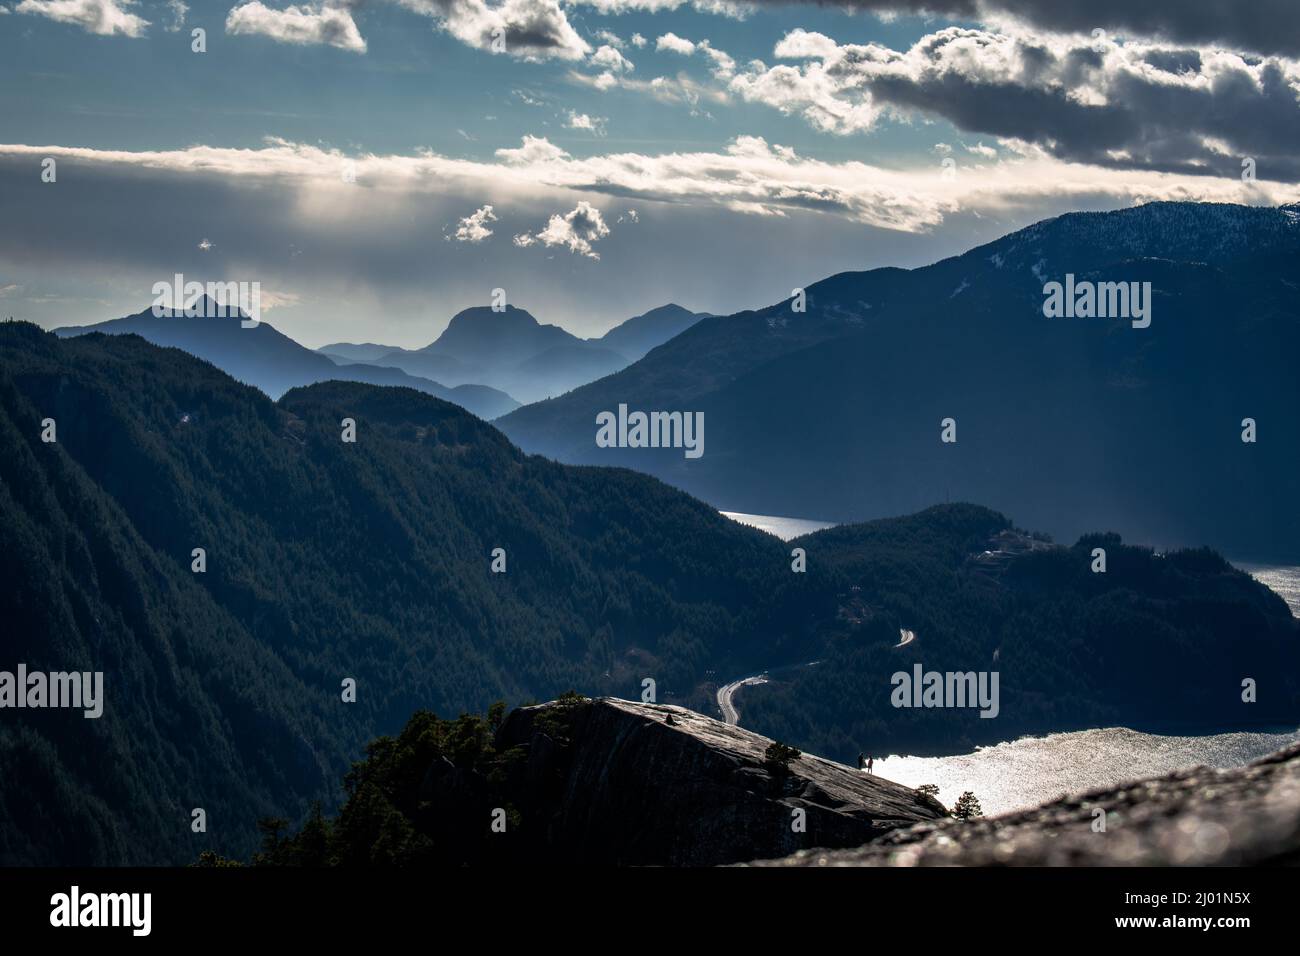 A high-angle perspective overlooking a rolling mountain pass alongside the ocean. Stock Photo